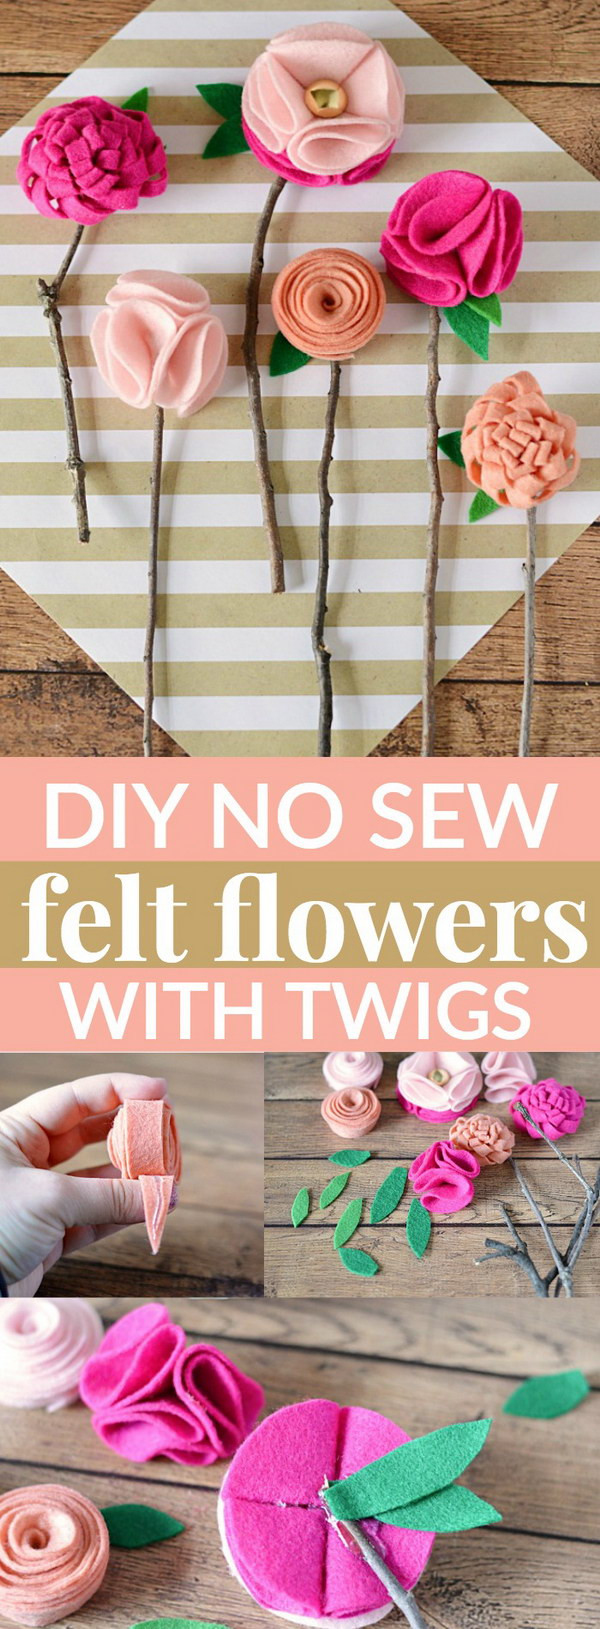 Pinterest Mothers Day Crafts
 20 Easy Weekend DIY Projects For Girls